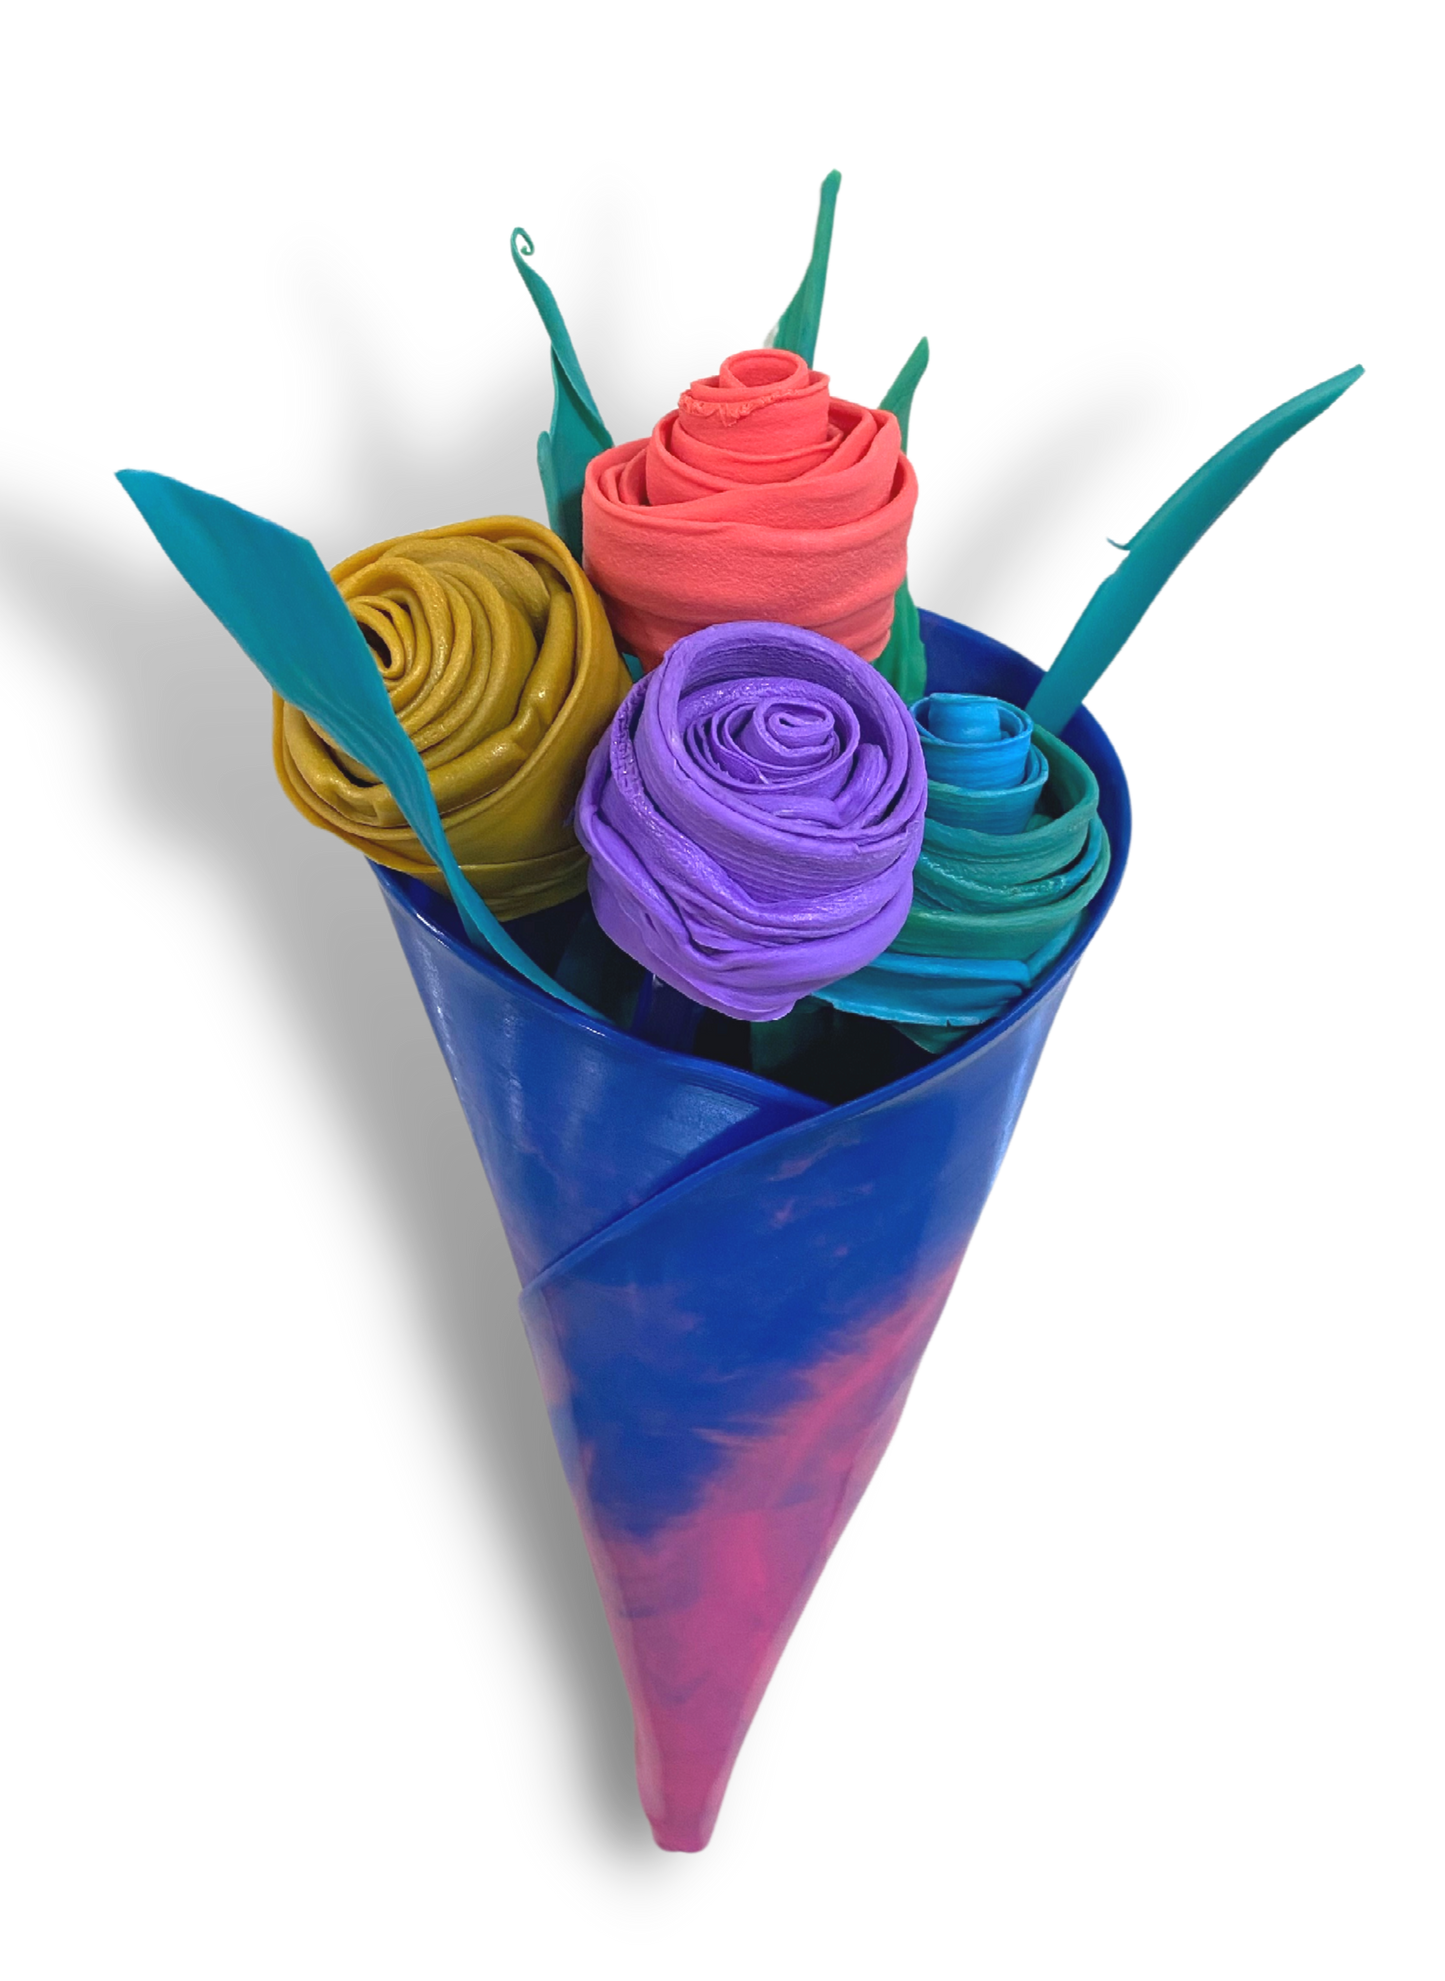 Recycled Vinyl Flower Bouquet - Tie-Dye (Limited Edition)